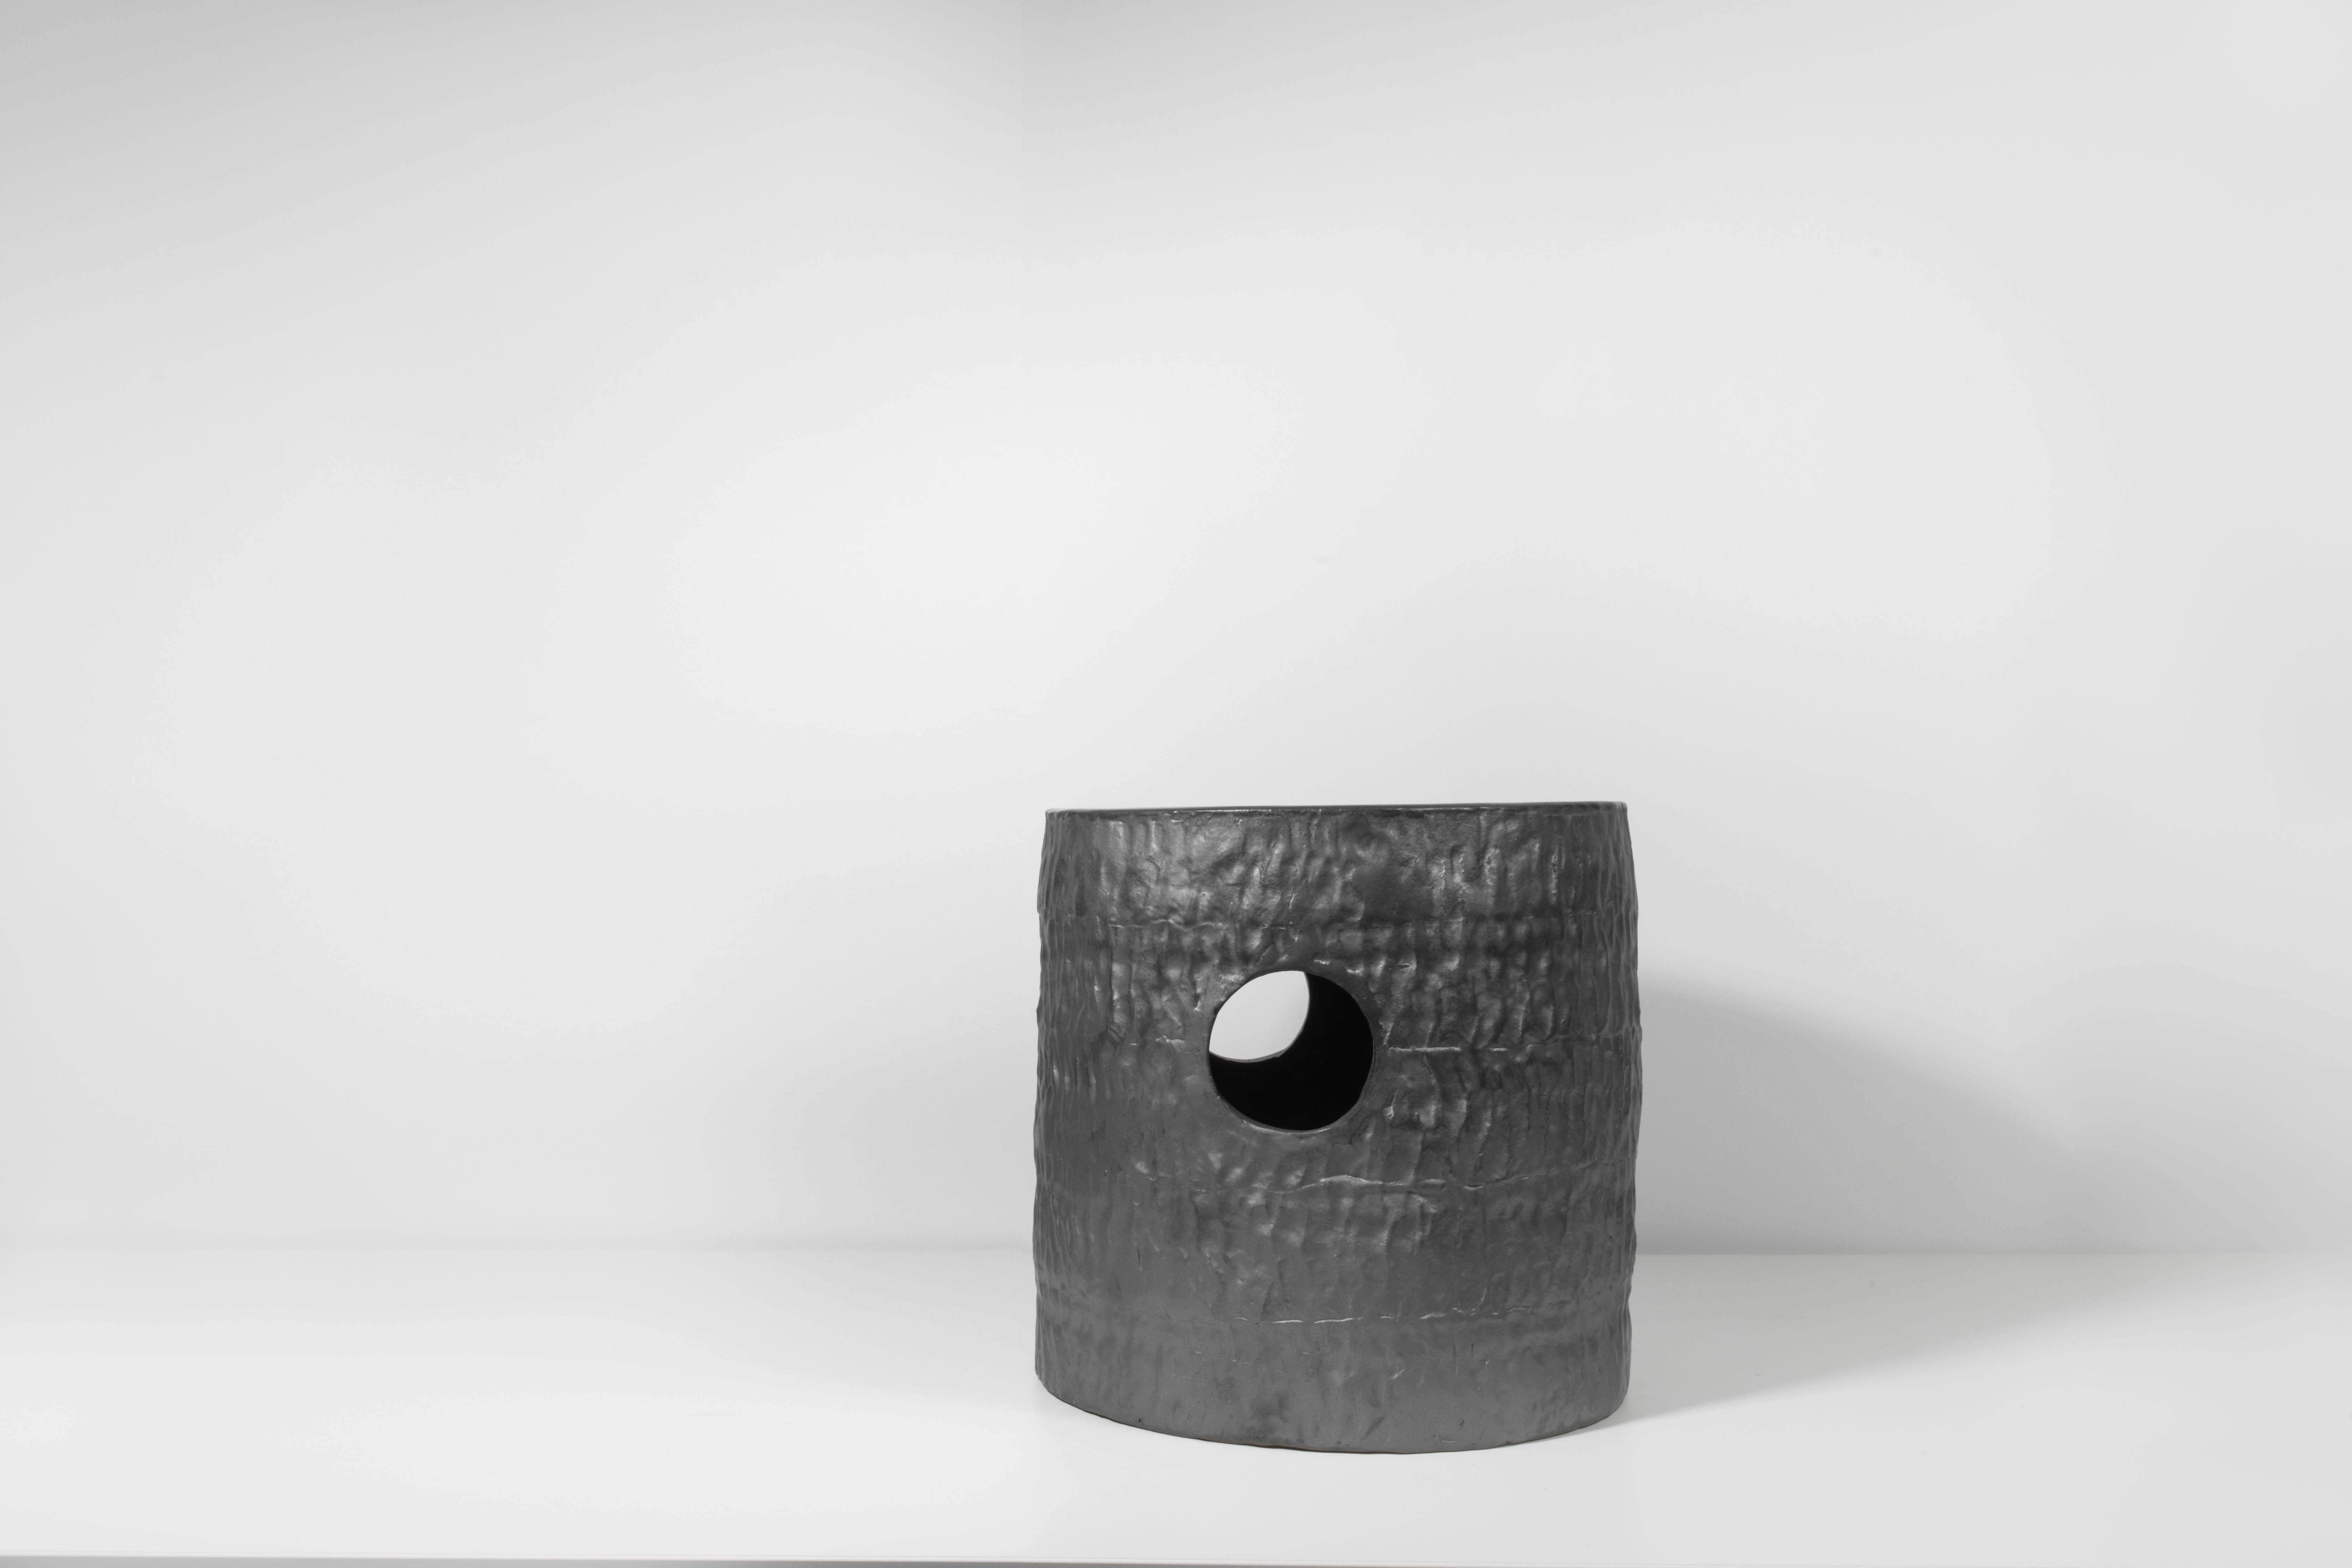 Coil-built ceramic stool with black coppered glaze. Marked with an engraved bronze label to underside: Jonathan Nesci w/ Robert Pulley 18/16. 

Designed by Jonathan Nesci and made in Columbus, Indiana by local ceramist Robert Pulley for inaugural